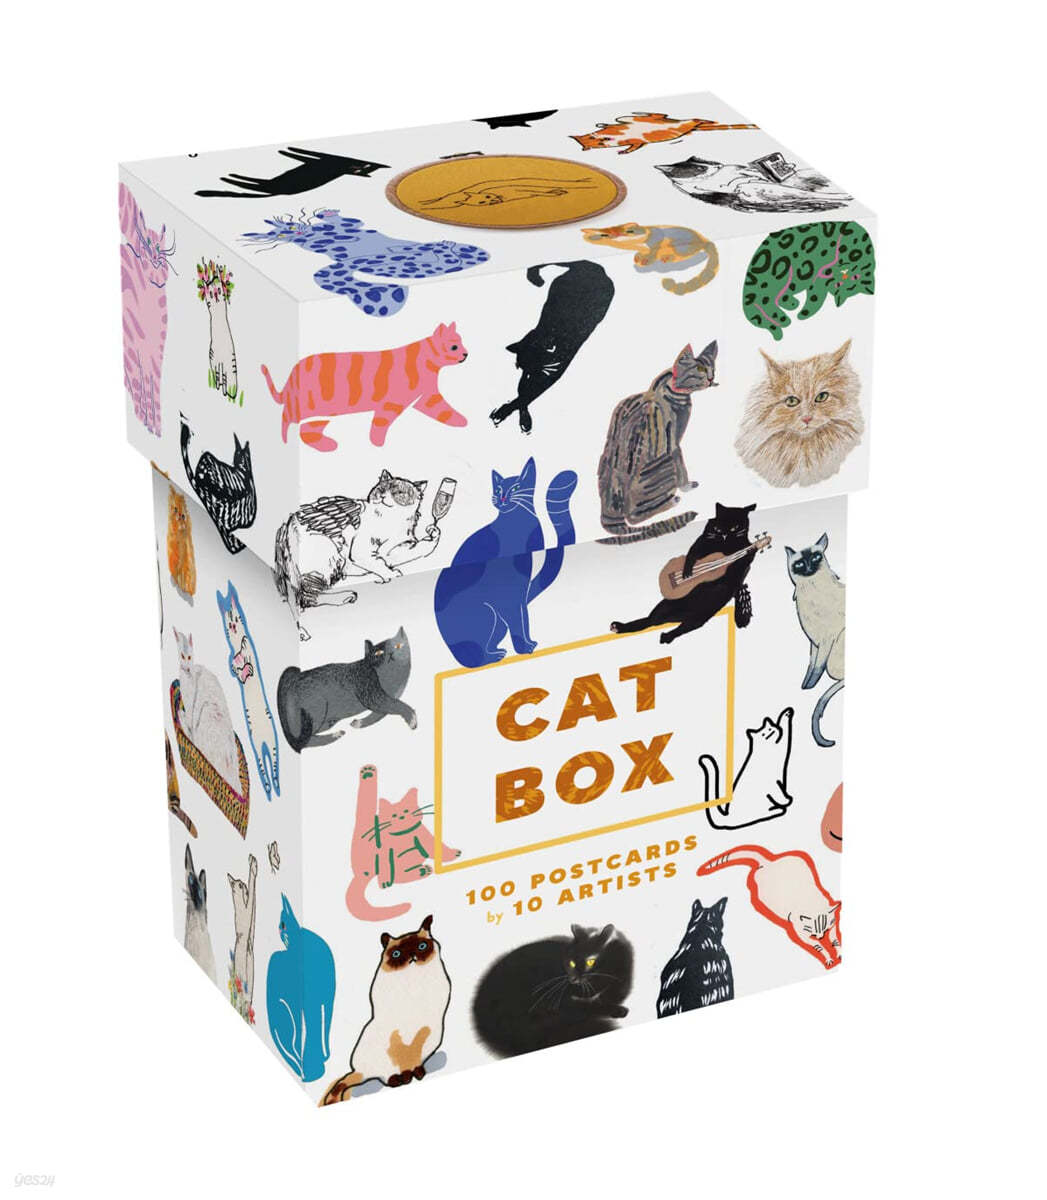 Cat Box (100 Postcards by 10 Artists)